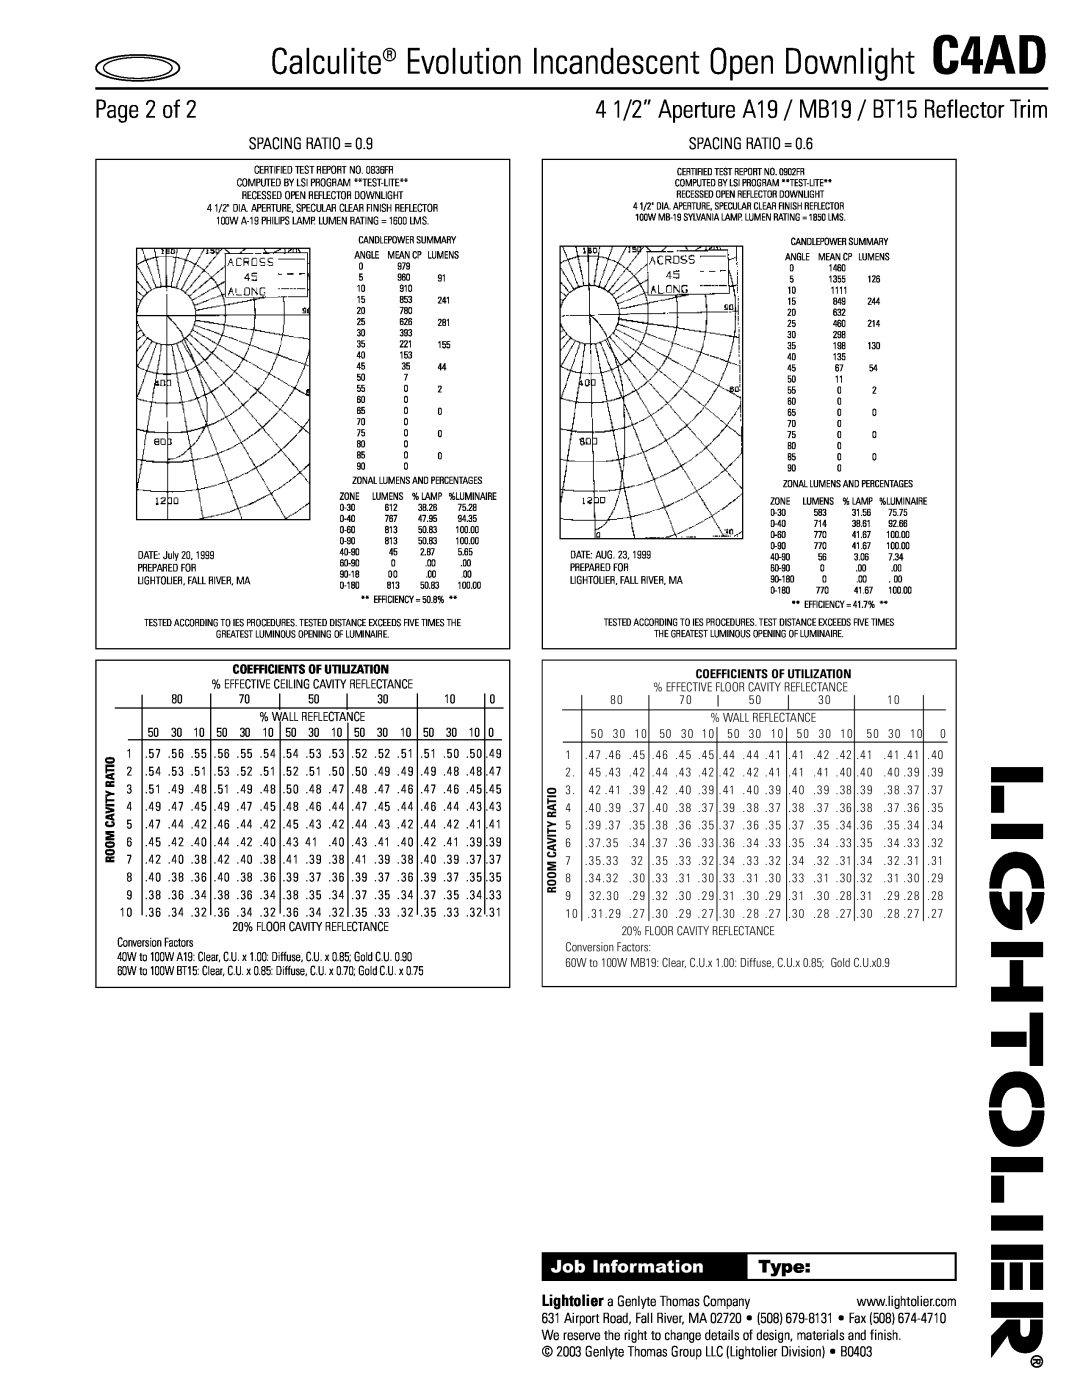 Lightolier C4AD Page 2 of, Type, 4 1/2” Aperture A19 / MB19 / BT15 Reflector Trim, Job Information, Spacing Ratio = 